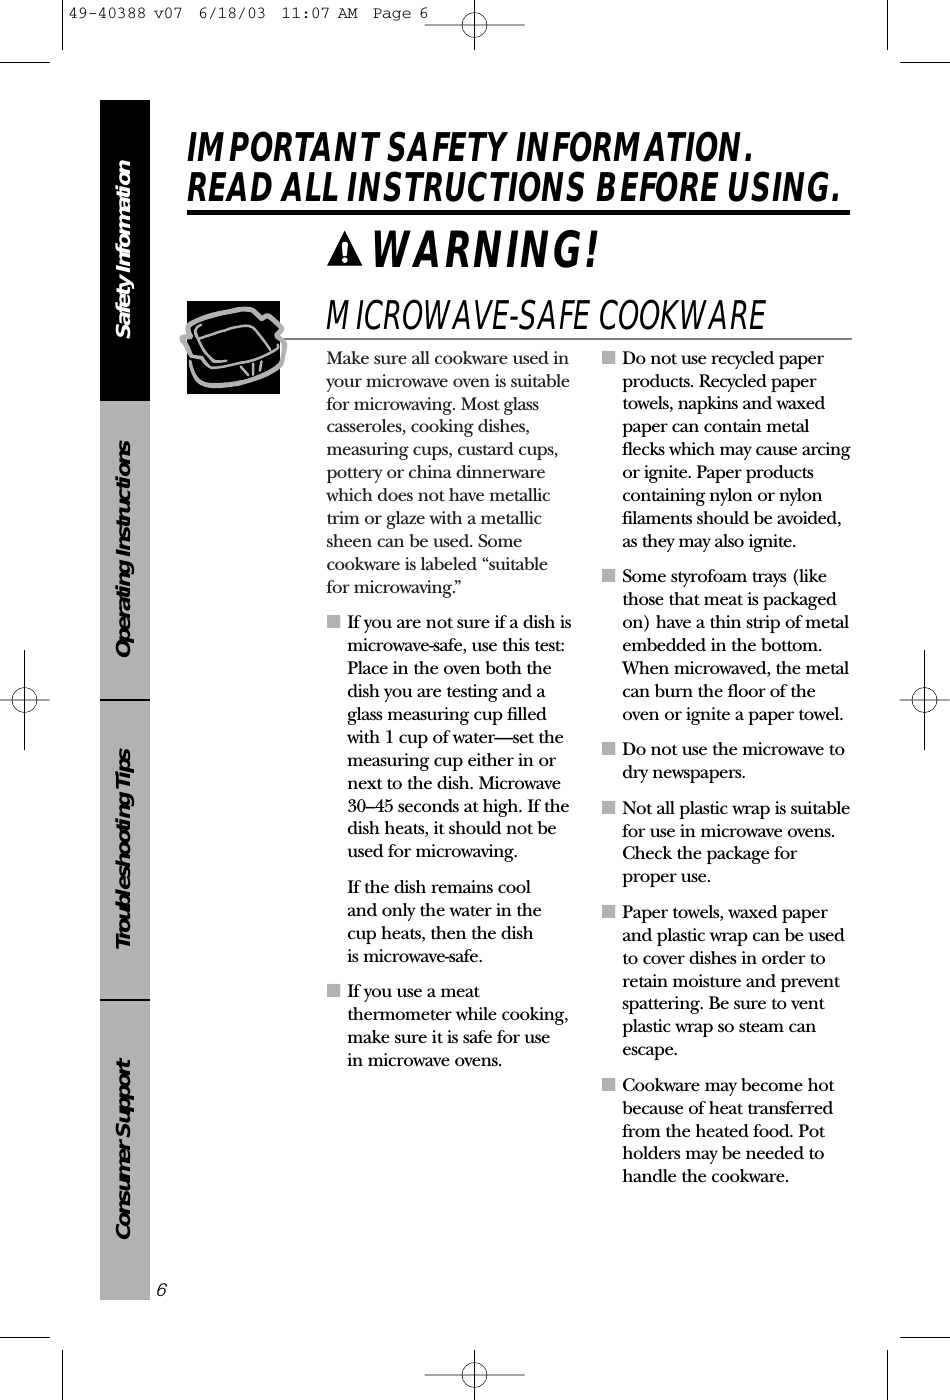 Make sure all cookware used inyour microwave oven is suitablefor microwaving. Most glasscasseroles, cooking dishes,measuring cups, custard cups,pottery or china dinnerwarewhich does not have metallictrim or glaze with a metallicsheen can be used. Somecookware is labeled “suitable for microwaving.”■If you are not sure if a dish ismicrowave-safe, use this test:Place in the oven both thedish you are testing and aglass measuring cup filledwith 1 cup of water—set themeasuring cup either in ornext to the dish. Microwave 30–45 seconds at high. If thedish heats, it should not beused for microwaving. If the dish remains cool and only the water in the cup heats, then the dish is microwave-safe.■If you use a meatthermometer while cooking,make sure it is safe for use in microwave ovens.■Do not use recycled paperproducts. Recycled papertowels, napkins and waxedpaper can contain metalflecks which may cause arcingor ignite. Paper productscontaining nylon or nylonfilaments should be avoided,as they may also ignite. ■Some styrofoam trays (likethose that meat is packagedon) have a thin strip of metalembedded in the bottom.When microwaved, the metalcan burn the floor of theoven or ignite a paper towel.■Do not use the microwave todry newspapers.■Not all plastic wrap is suitablefor use in microwave ovens.Check the package forproper use.■Paper towels, waxed paperand plastic wrap can be usedto cover dishes in order toretain moisture and preventspattering. Be sure to ventplastic wrap so steam canescape.■Cookware may become hotbecause of heat transferredfrom the heated food. Potholders may be needed tohandle the cookware.MICROWAVE-SAFE COOKWARESafety InformationOperating InstructionsTroubleshooting TipsConsumer SupportIMPORTANT SAFETY INFORMATION.READ ALL INSTRUCTIONS BEFORE USING.6WARNING! 49-40388 v07  6/18/03  11:07 AM  Page 6